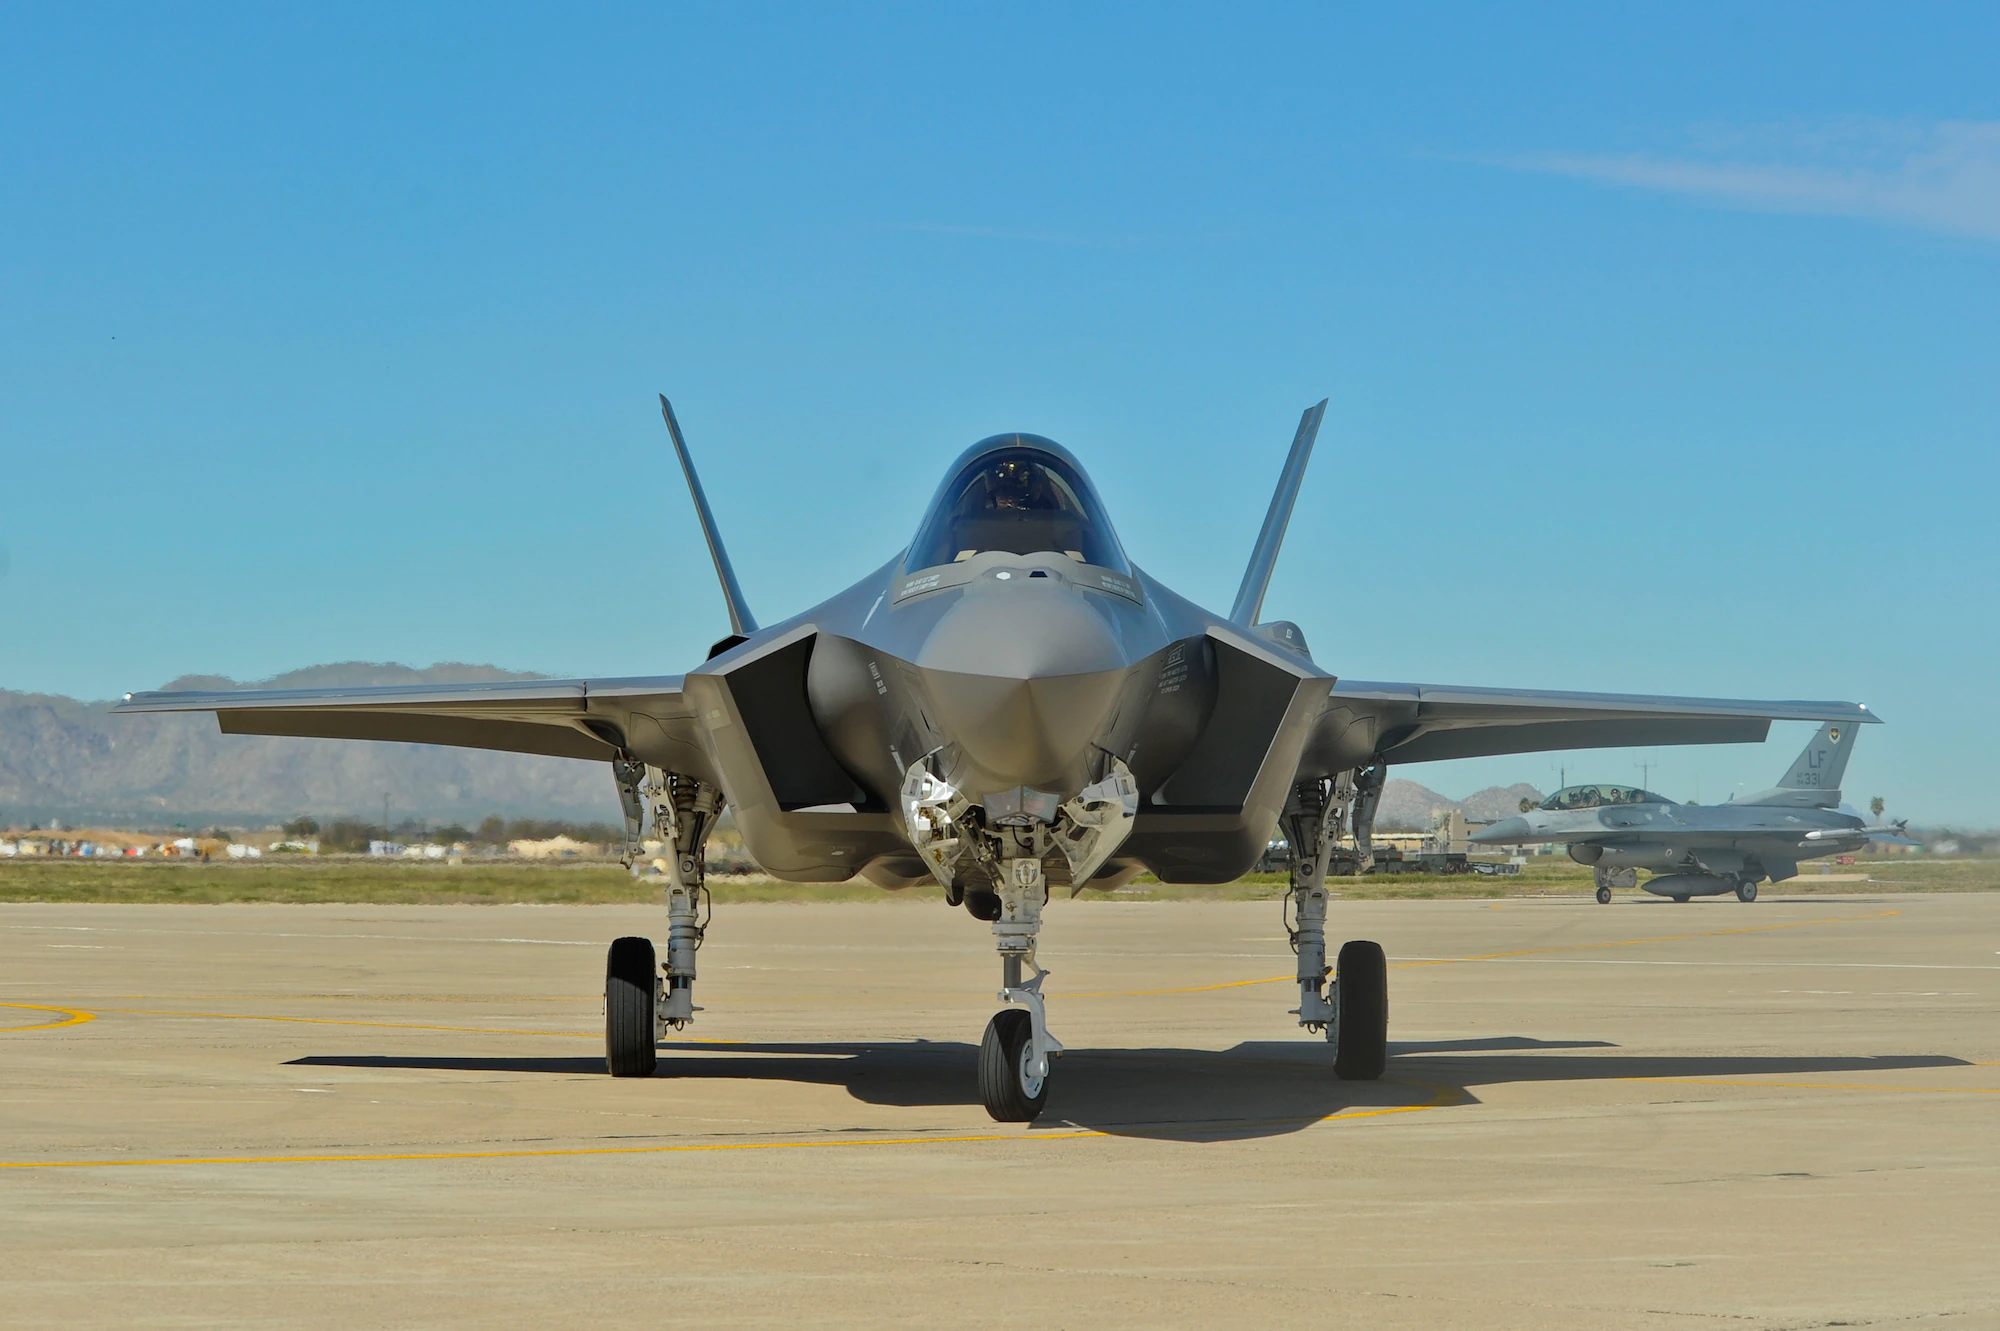 Pentagon temporarily banned some F-35 Lightning II fighters after plane crash in Texas